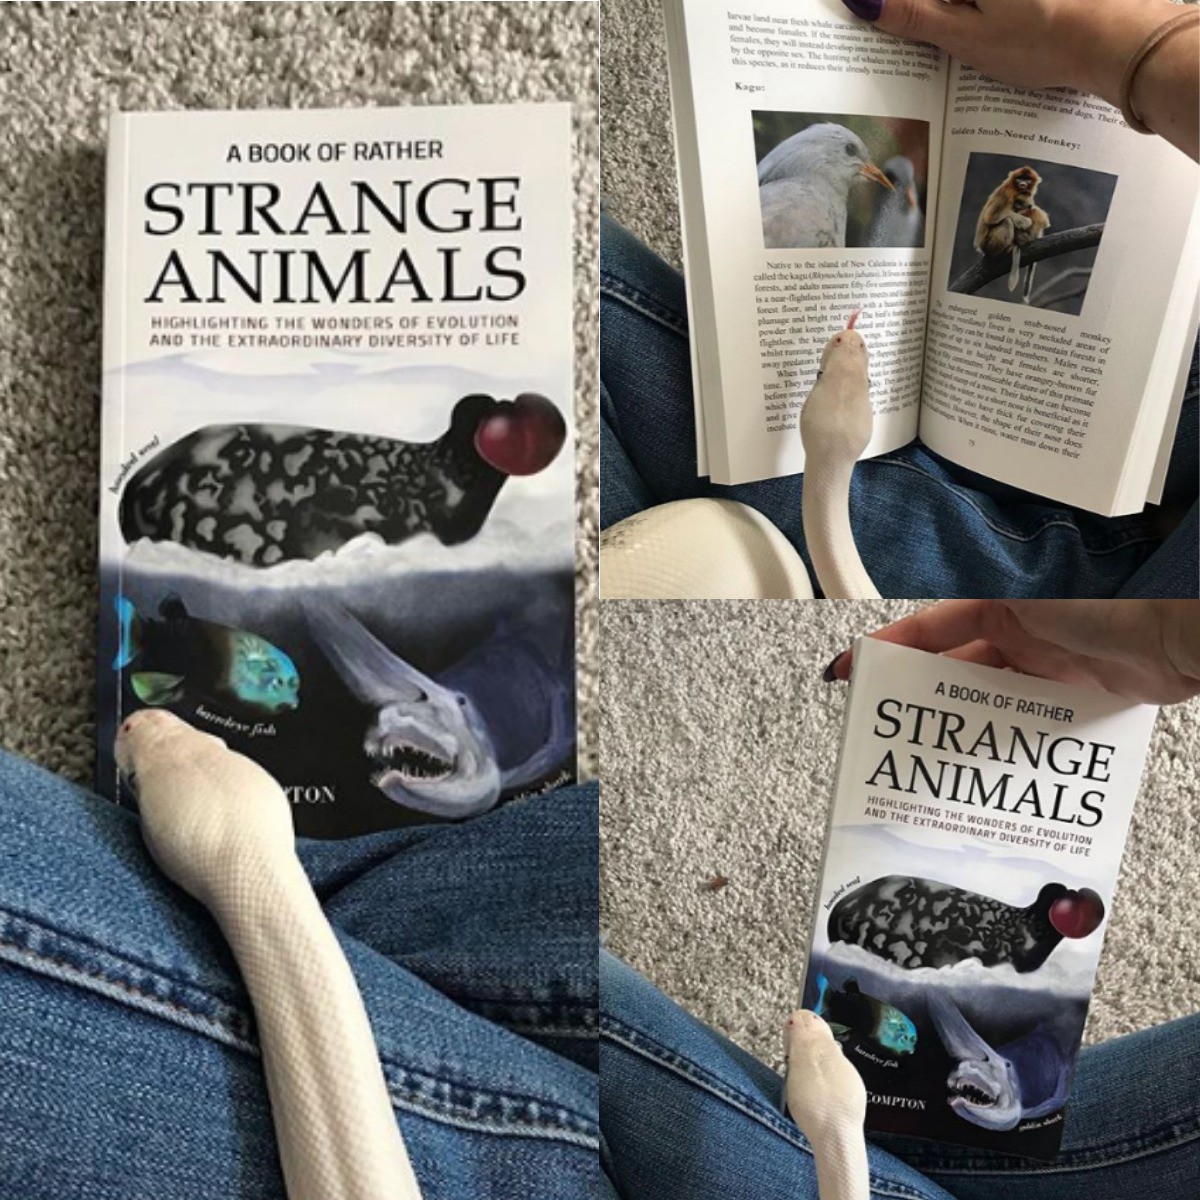 Instagram Account Opal The Ball Python(Opal_Escent) Featured A Book of Rather Strange Animals